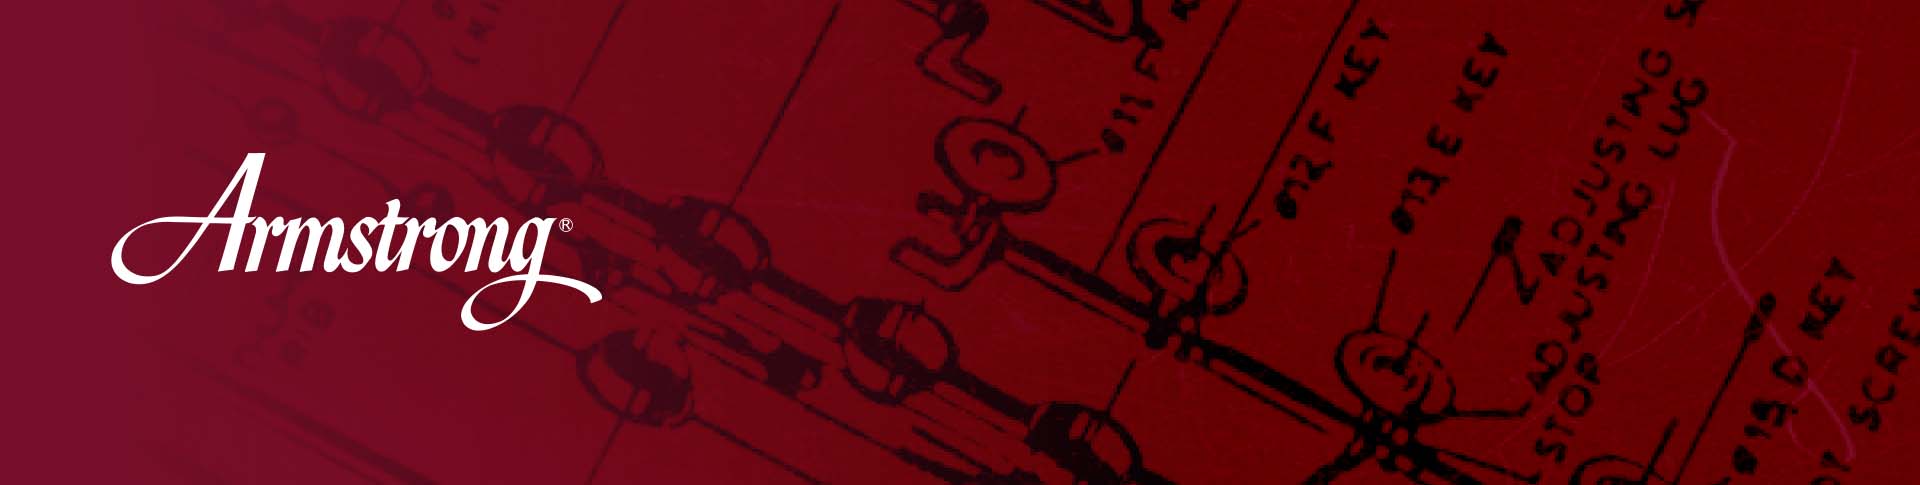 Armstrong logo on top of red flute schematics